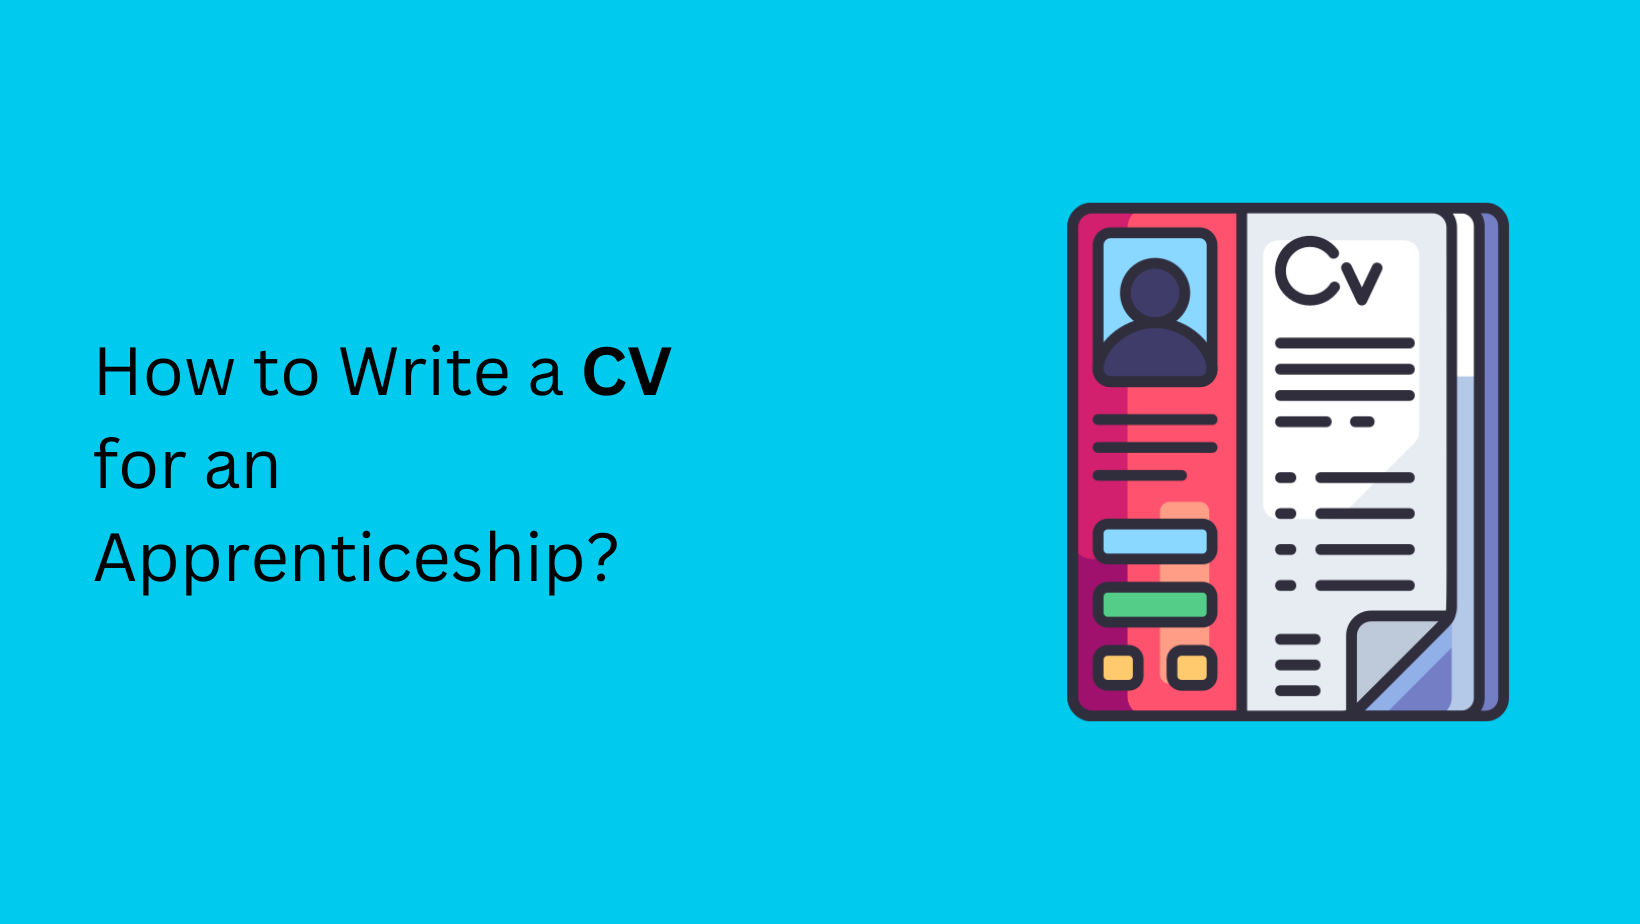 How to Write a CV for an Apprenticeship